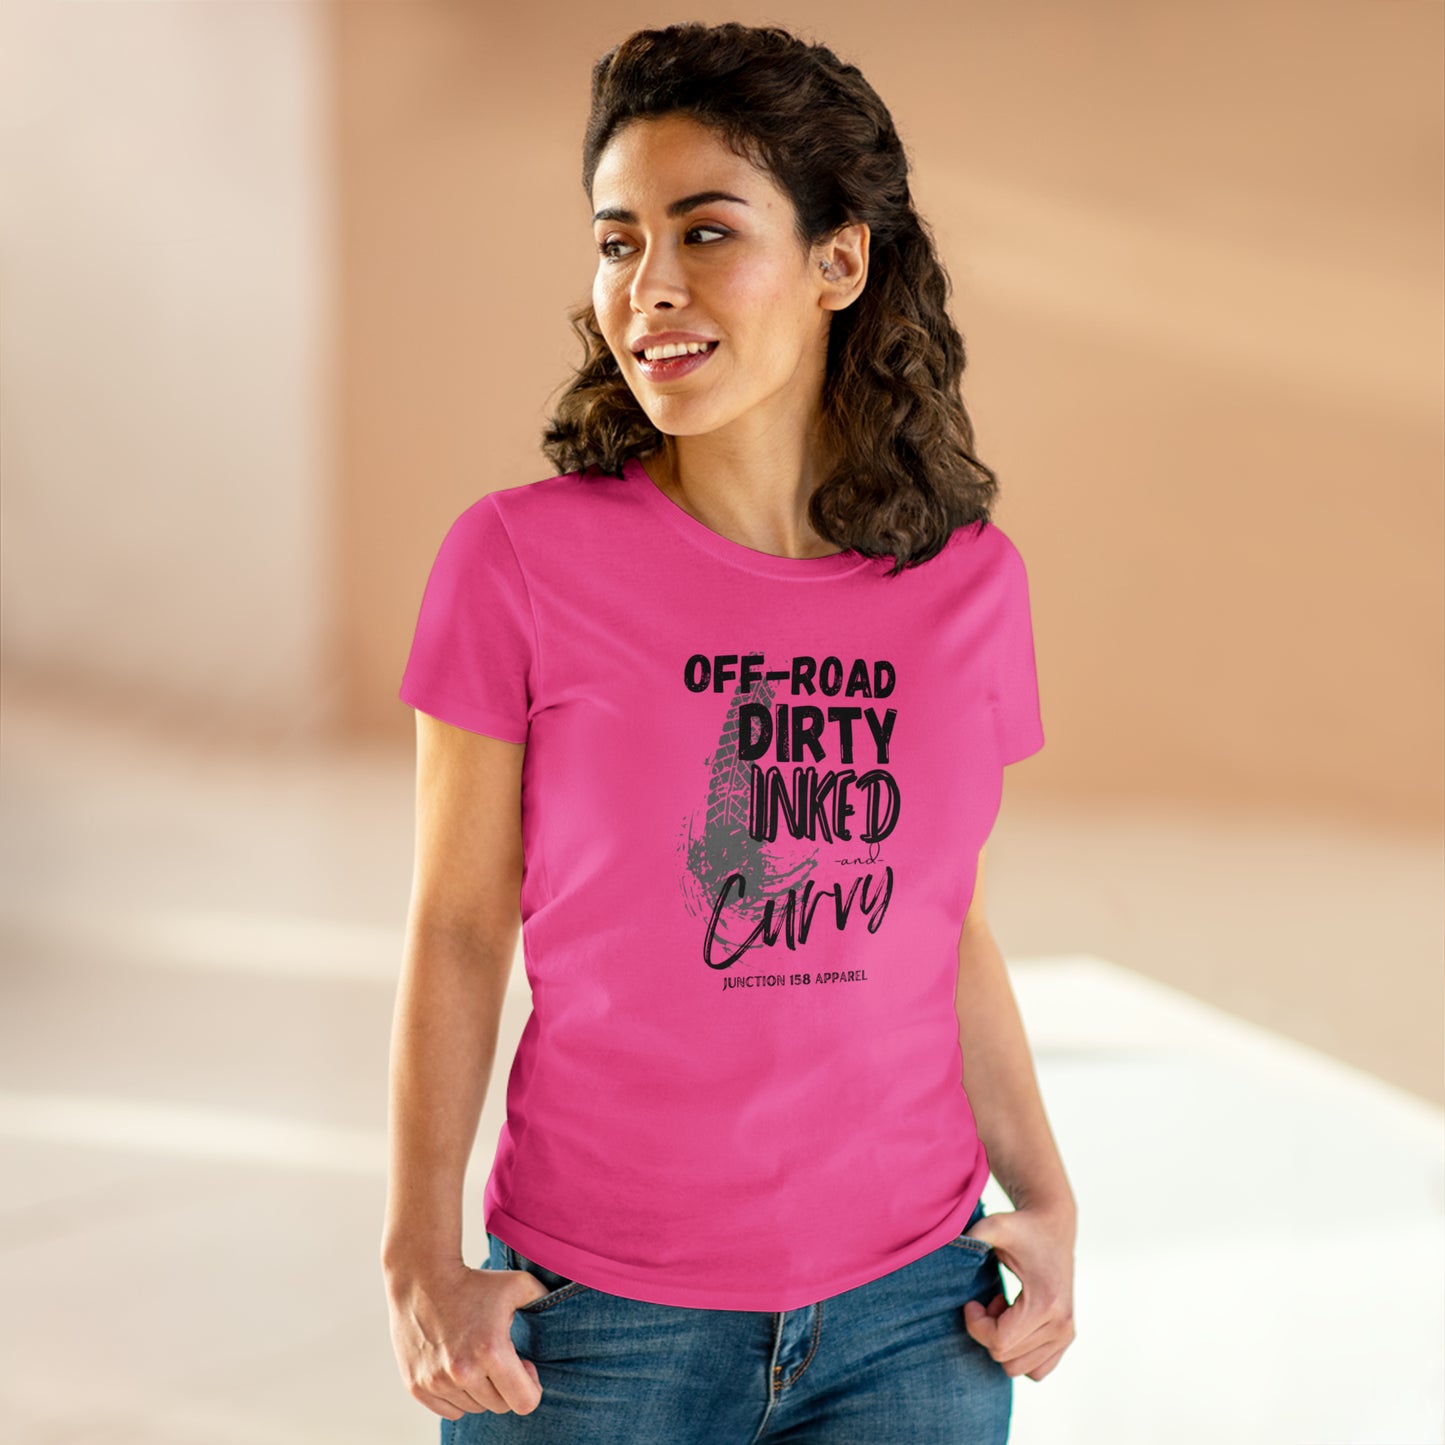 Off-Road Dirty, Inked, & Curvy Tee